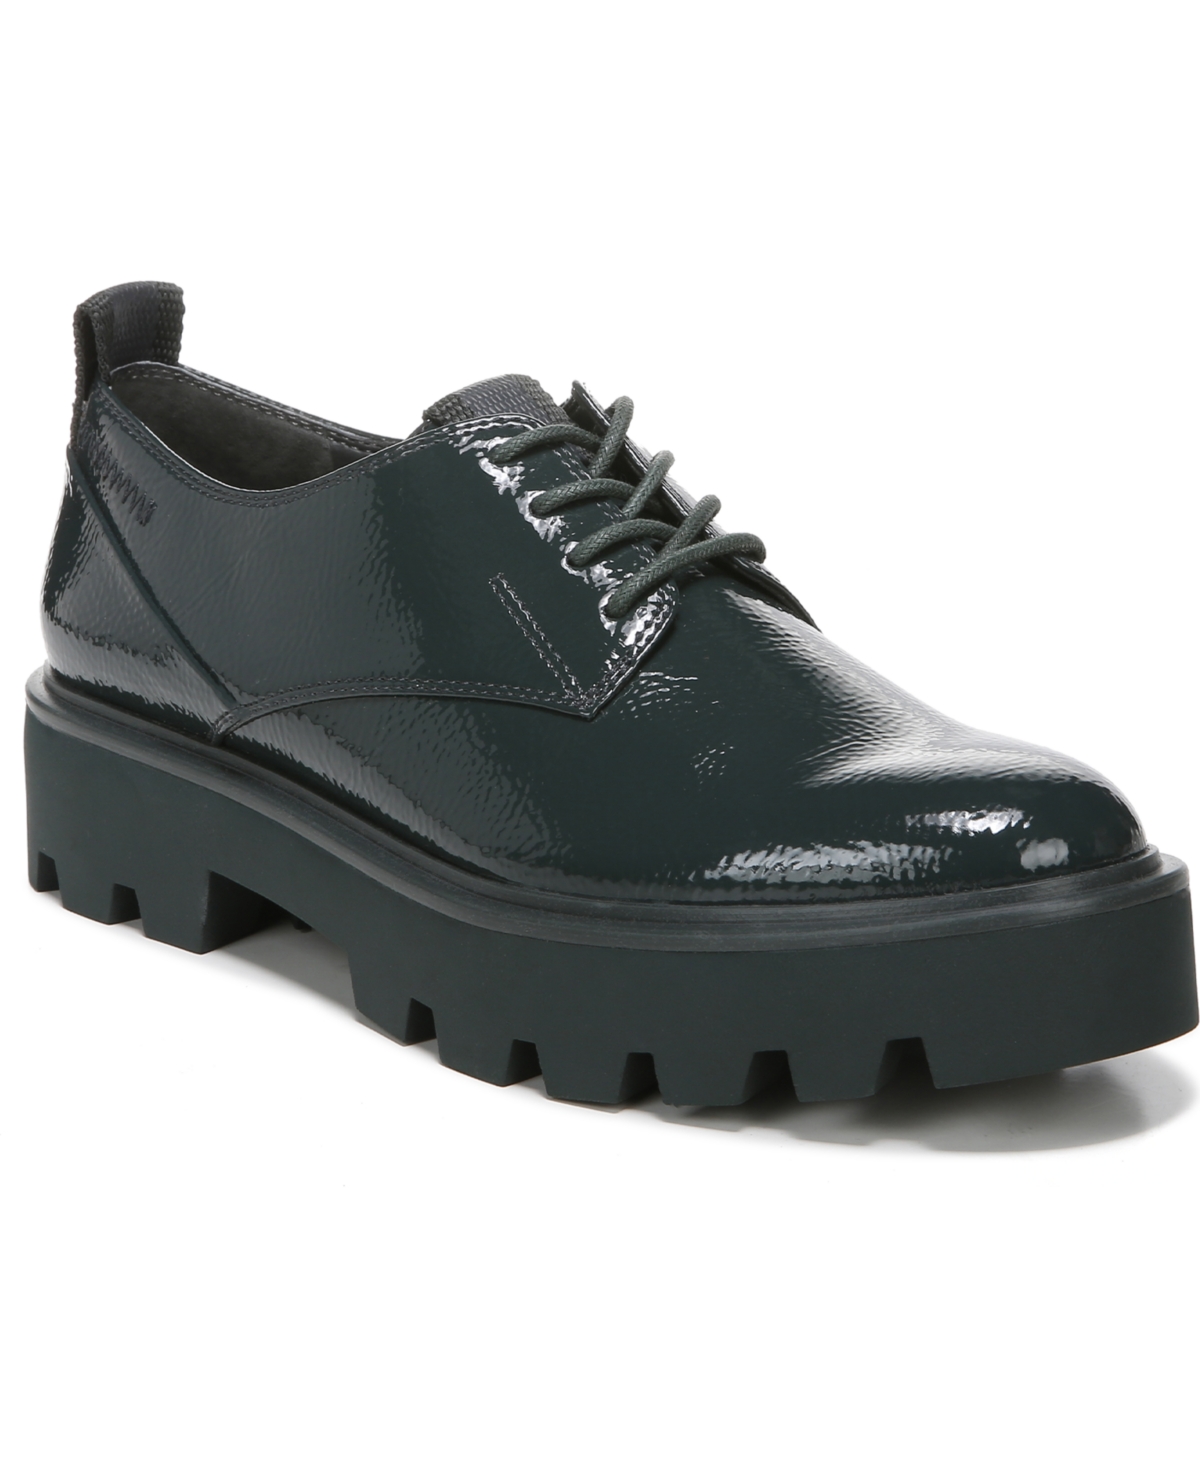 UPC 017138587501 product image for Franco Sarto Balin Laced Lug Sole Oxfords Women's Shoes | upcitemdb.com